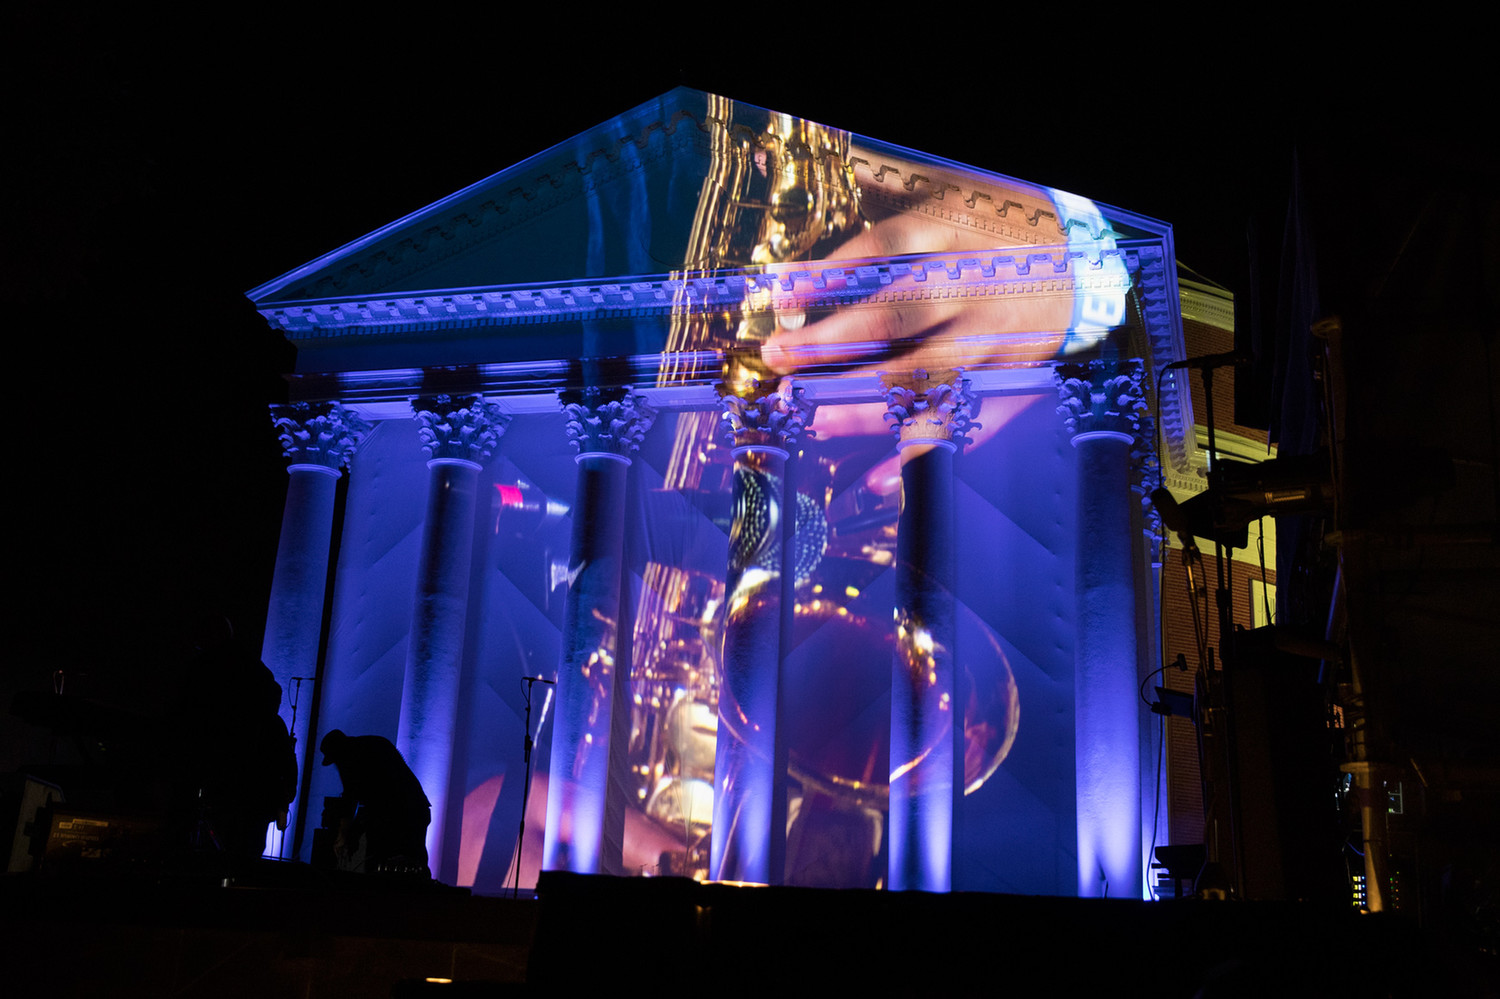 A saxophonist from UVA's Jazz Ensemble projected on the Rotunda